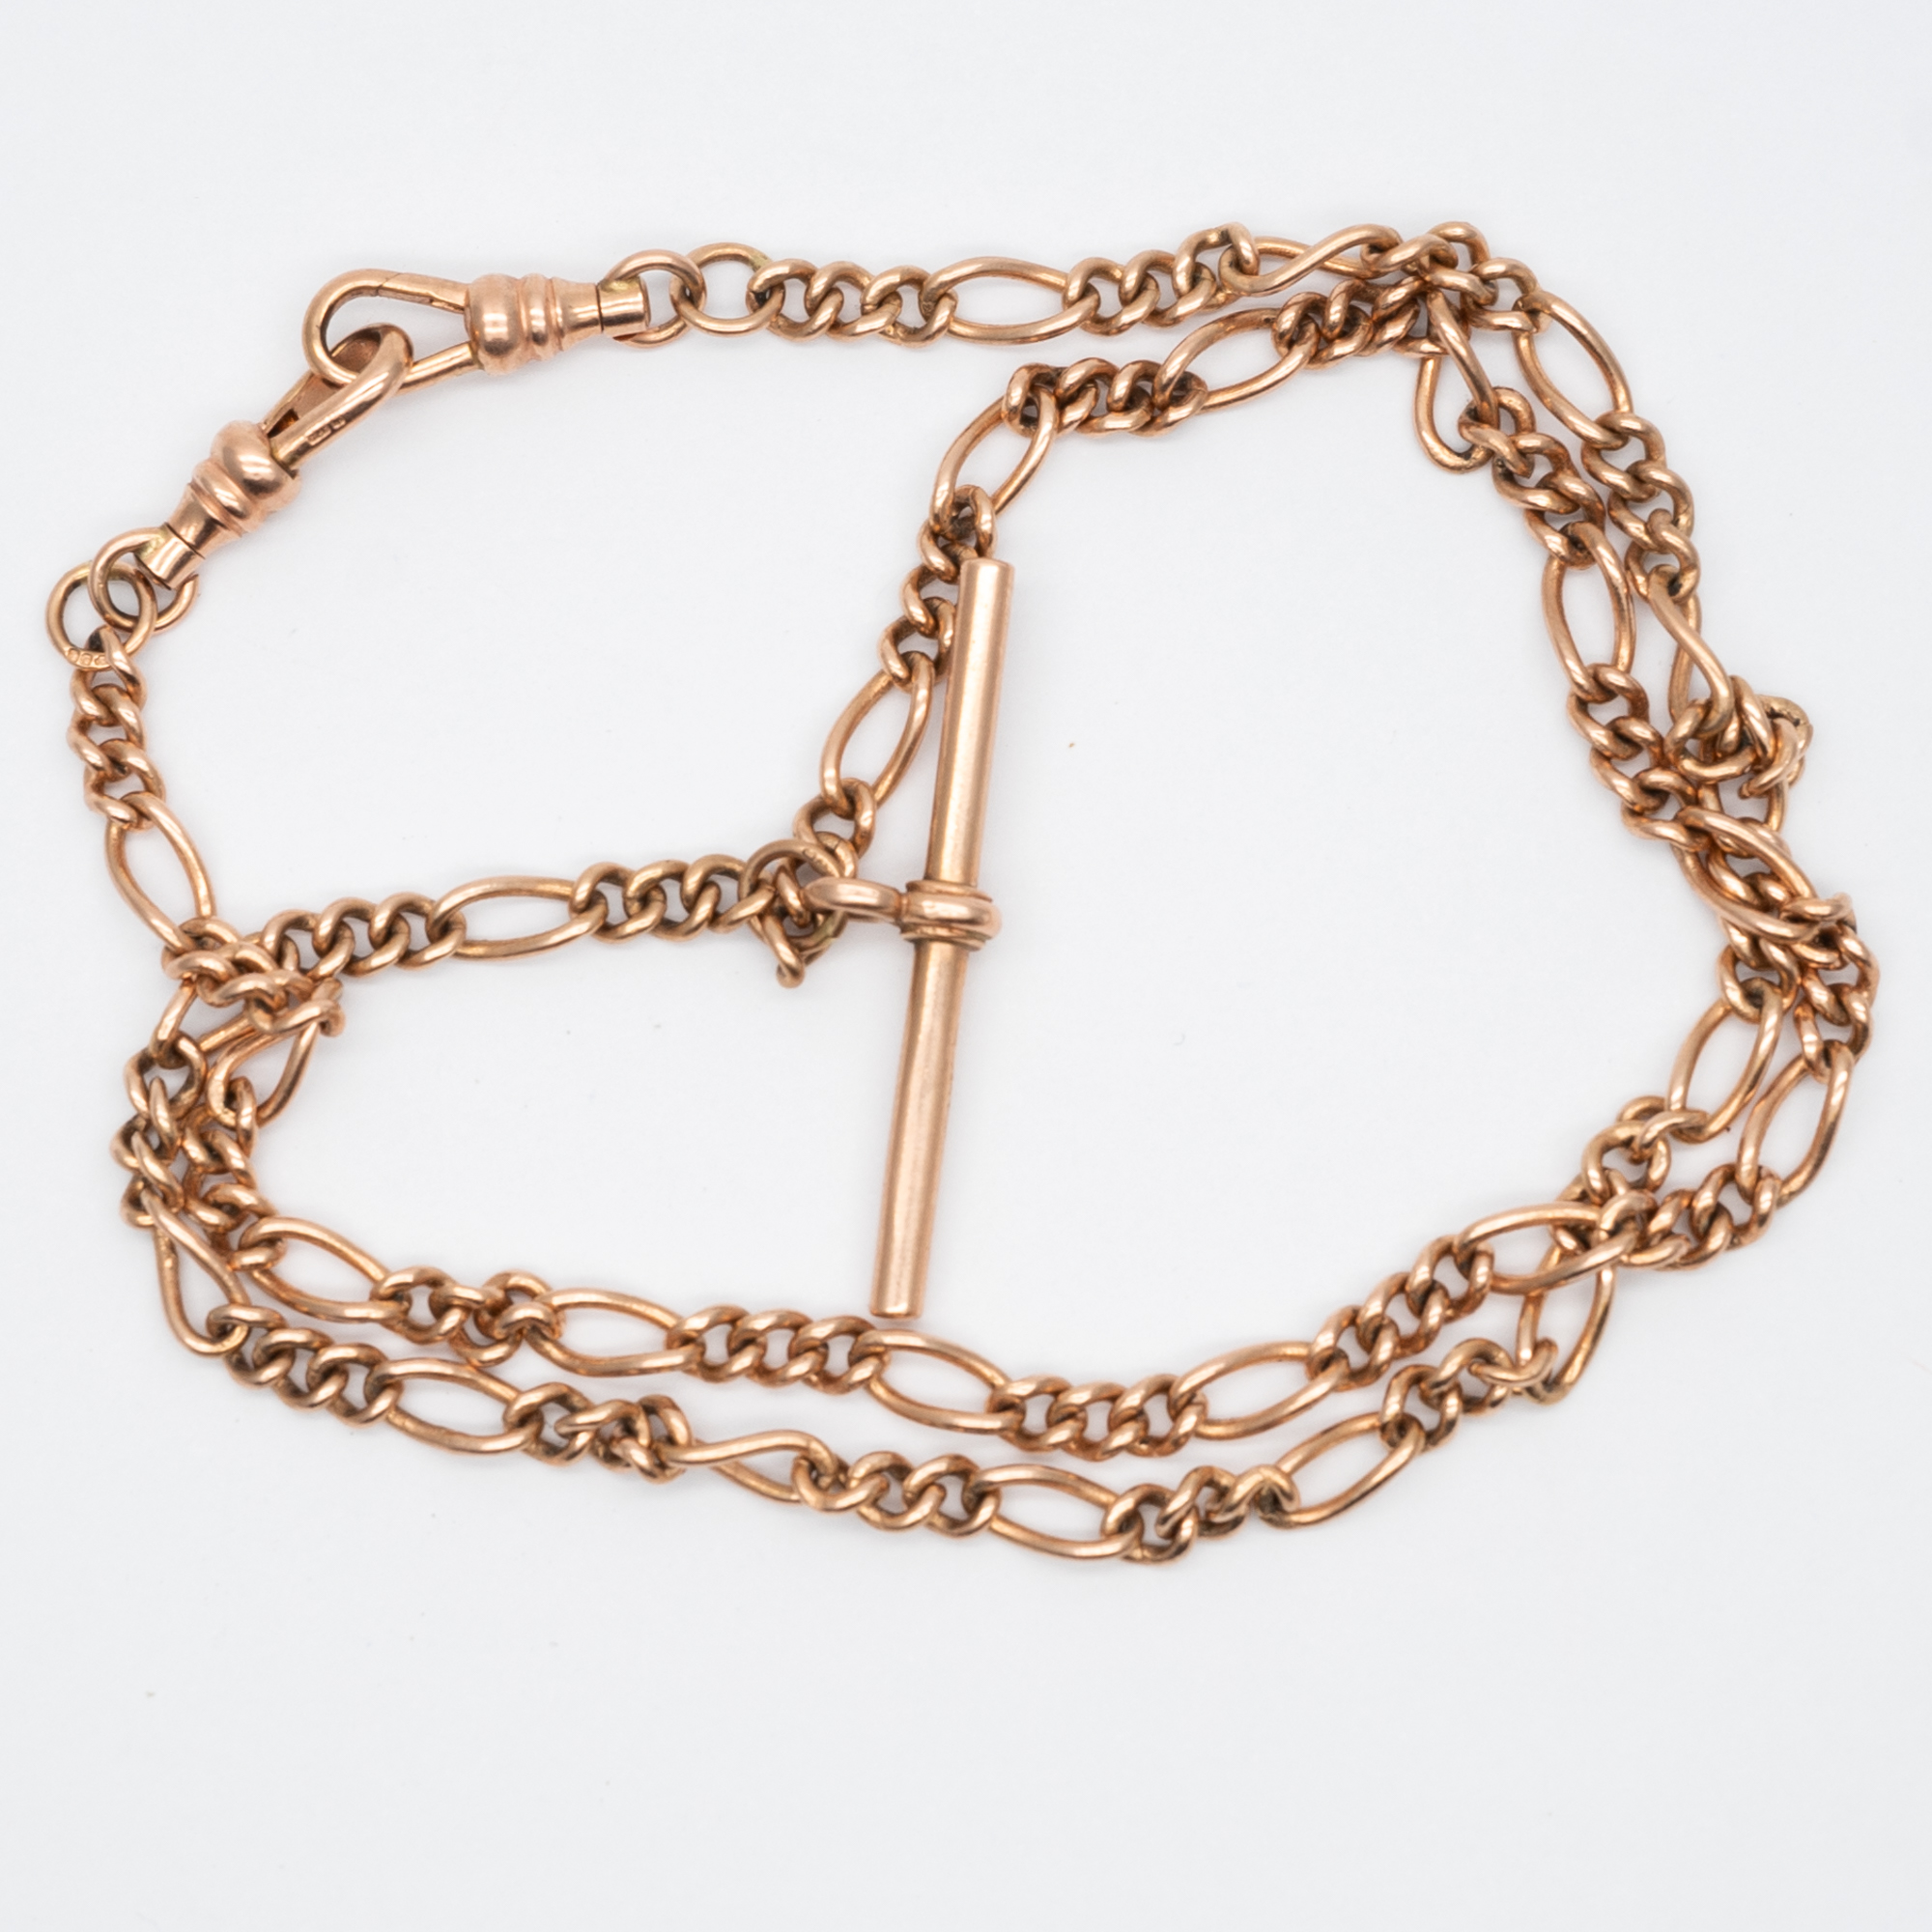 A 9ct rose gold solid linked albert chain